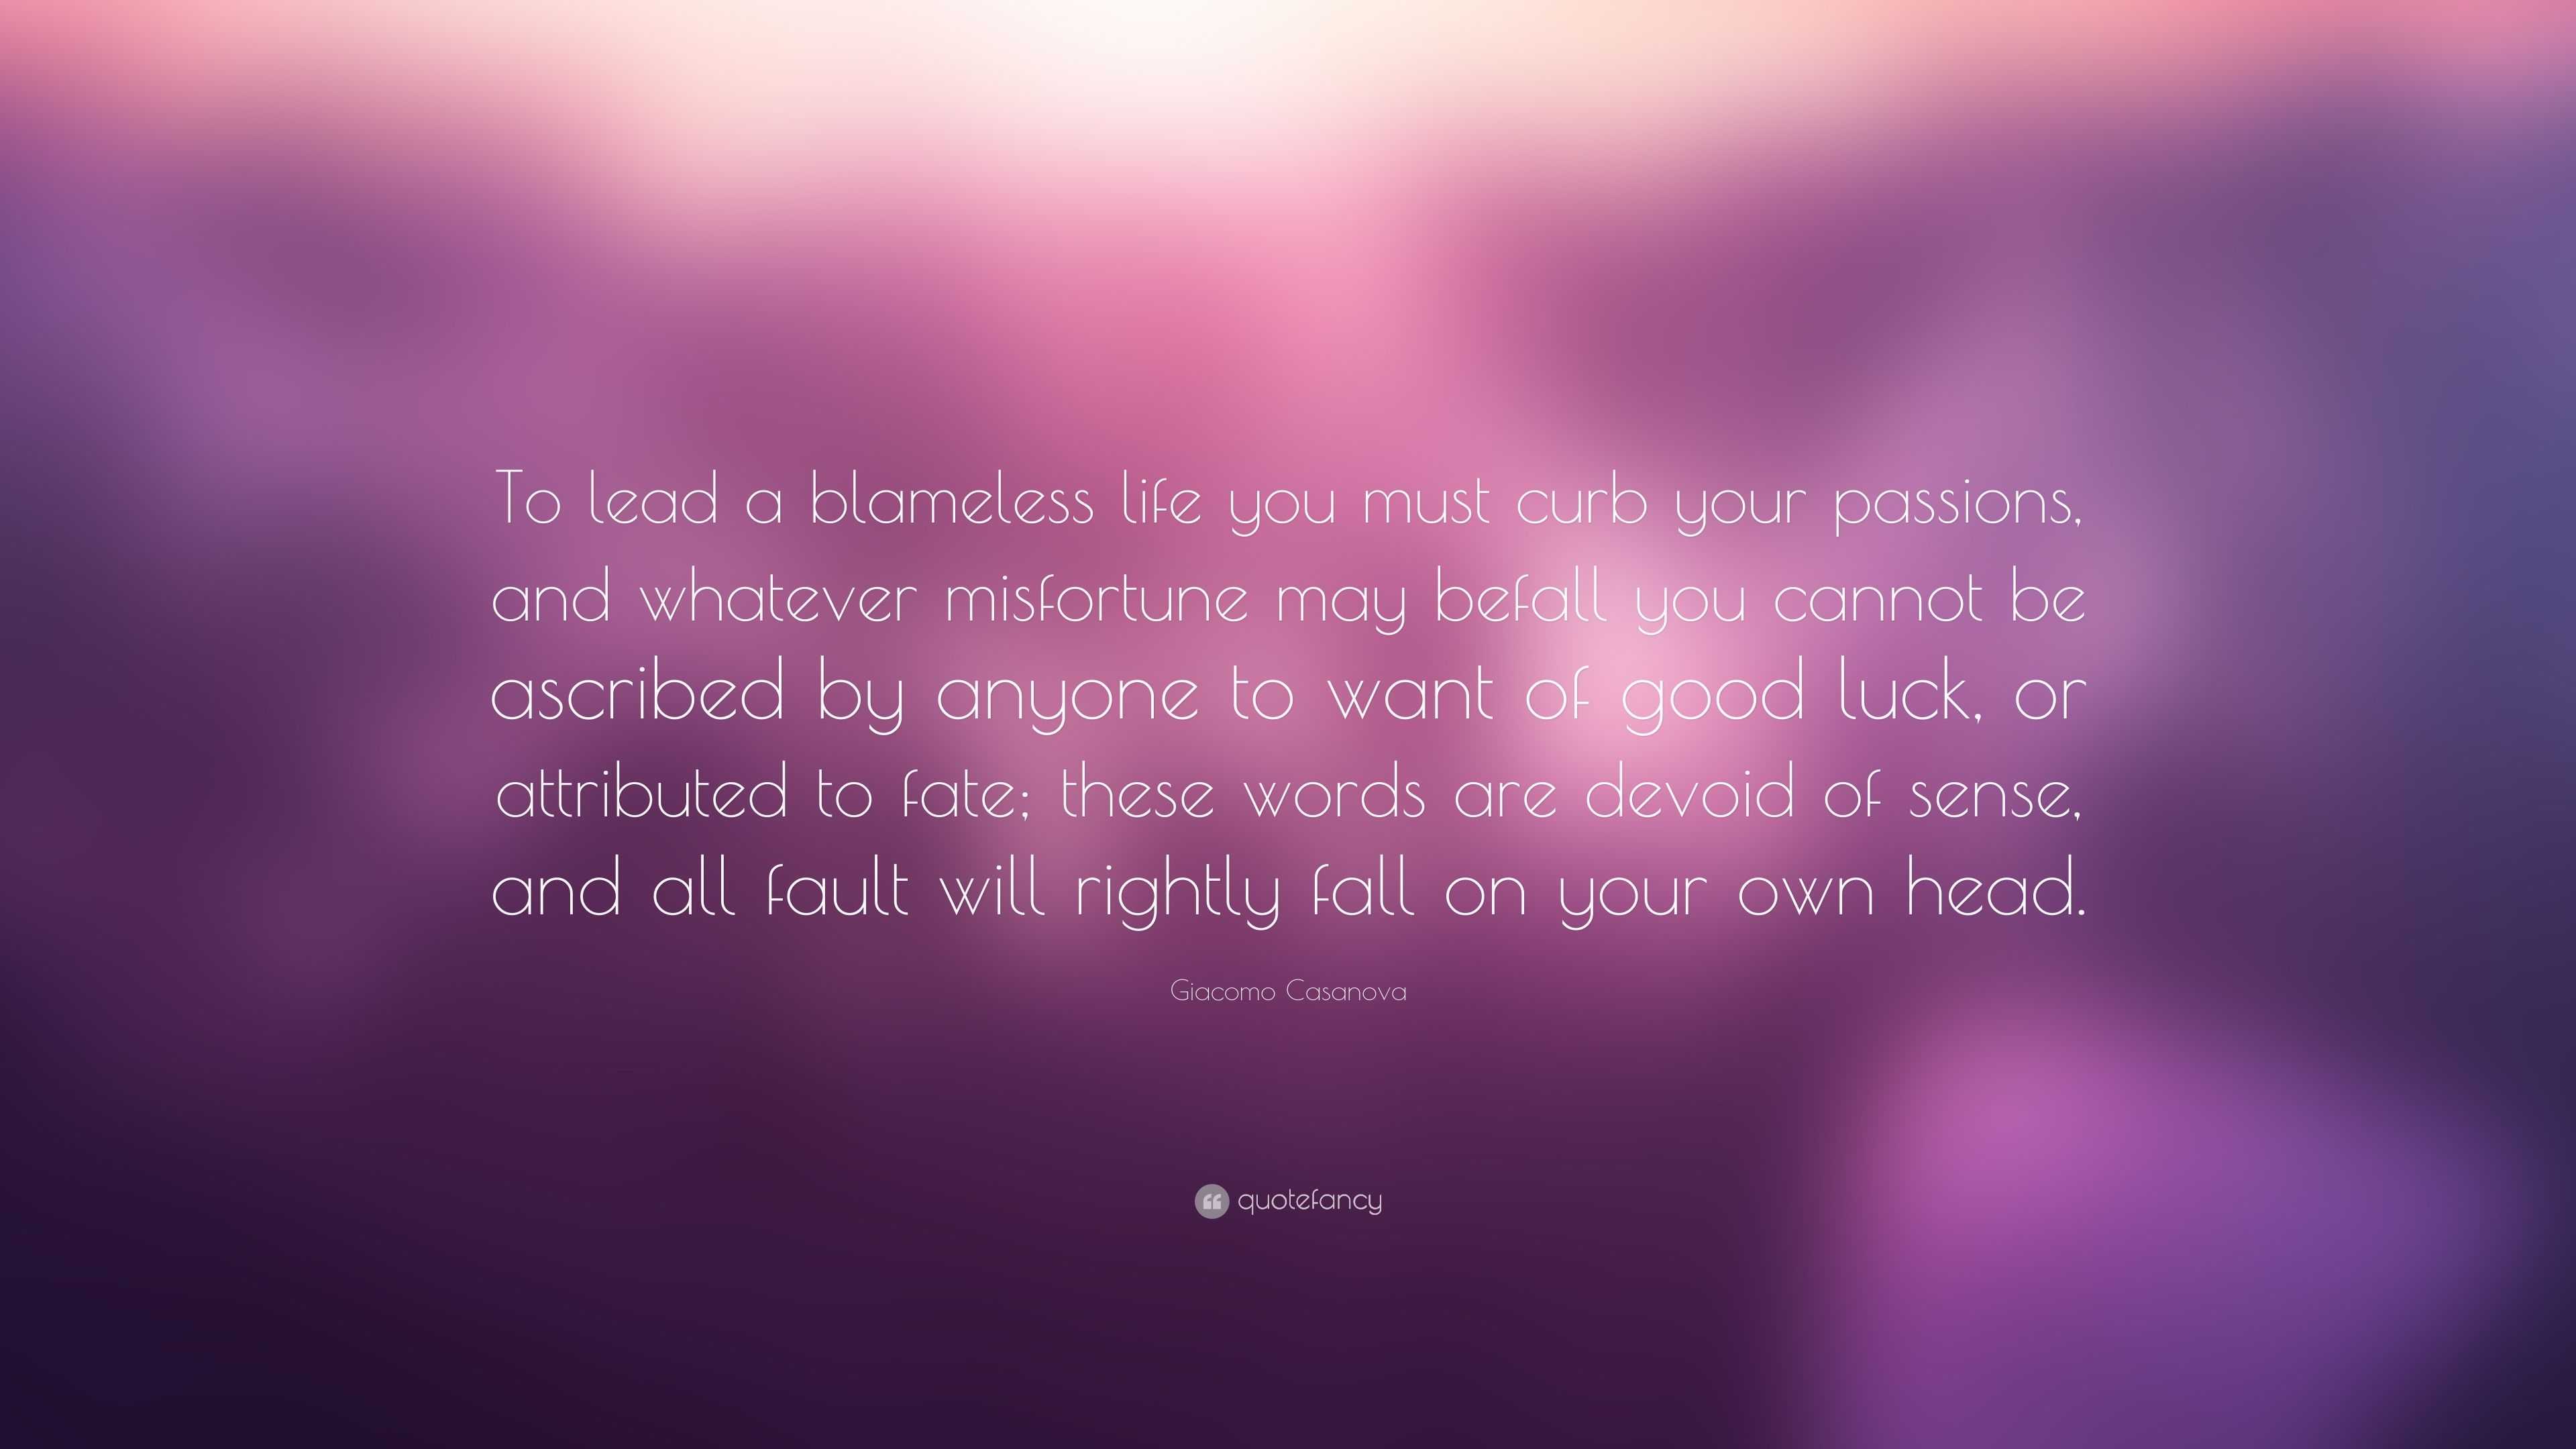 Giacomo Casanova Quote: “To lead a blameless life you must curb your ...